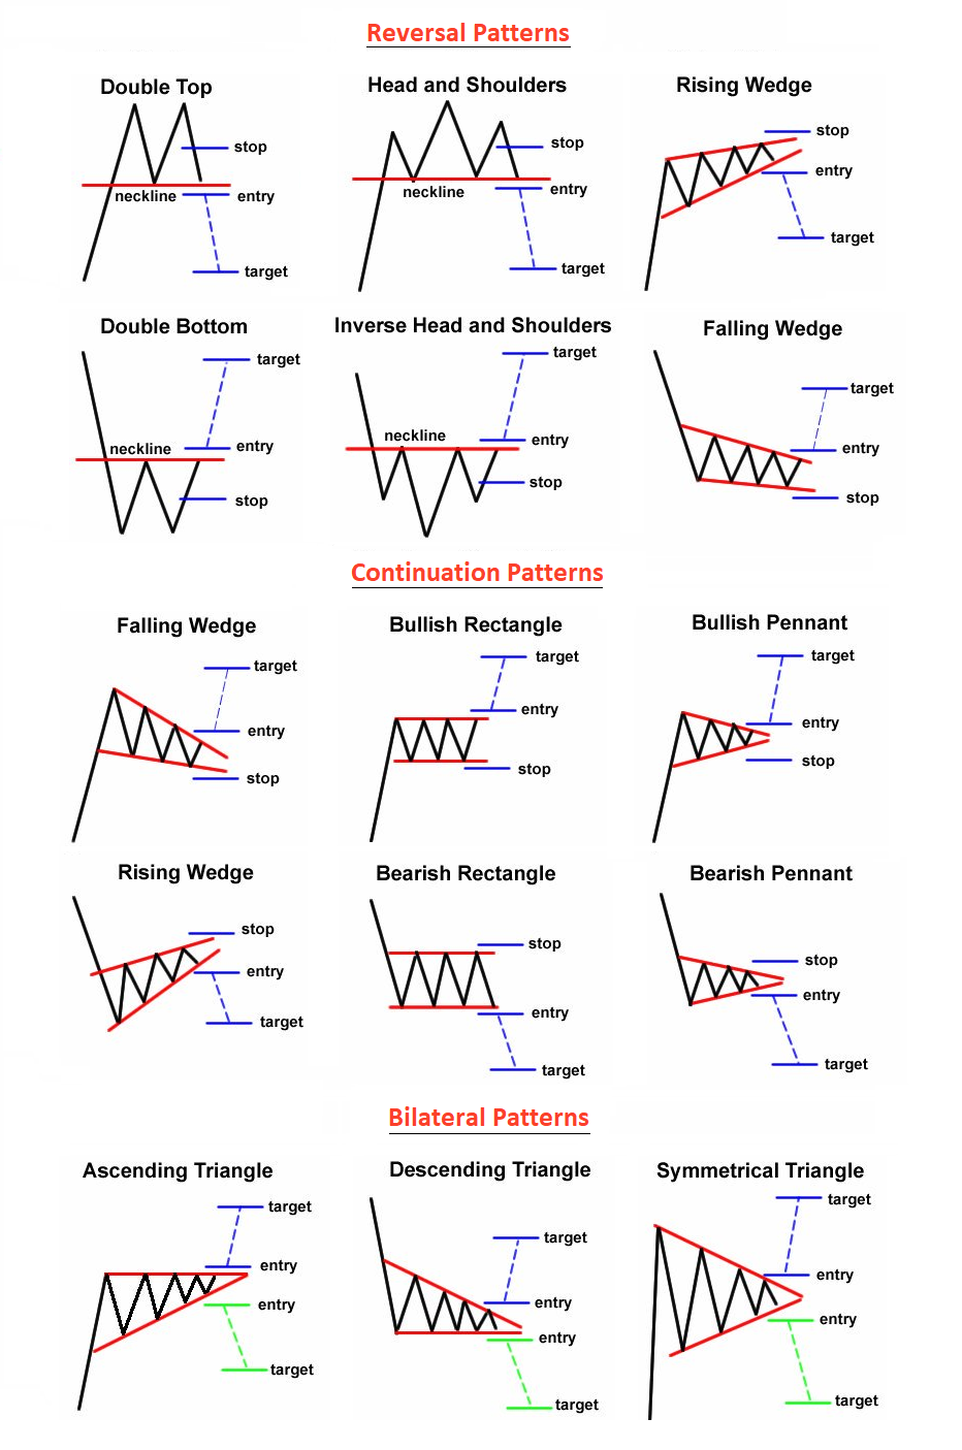 day trading chart patterns head and shoulders rising wedge doubletop bullish pennant bearish pennant